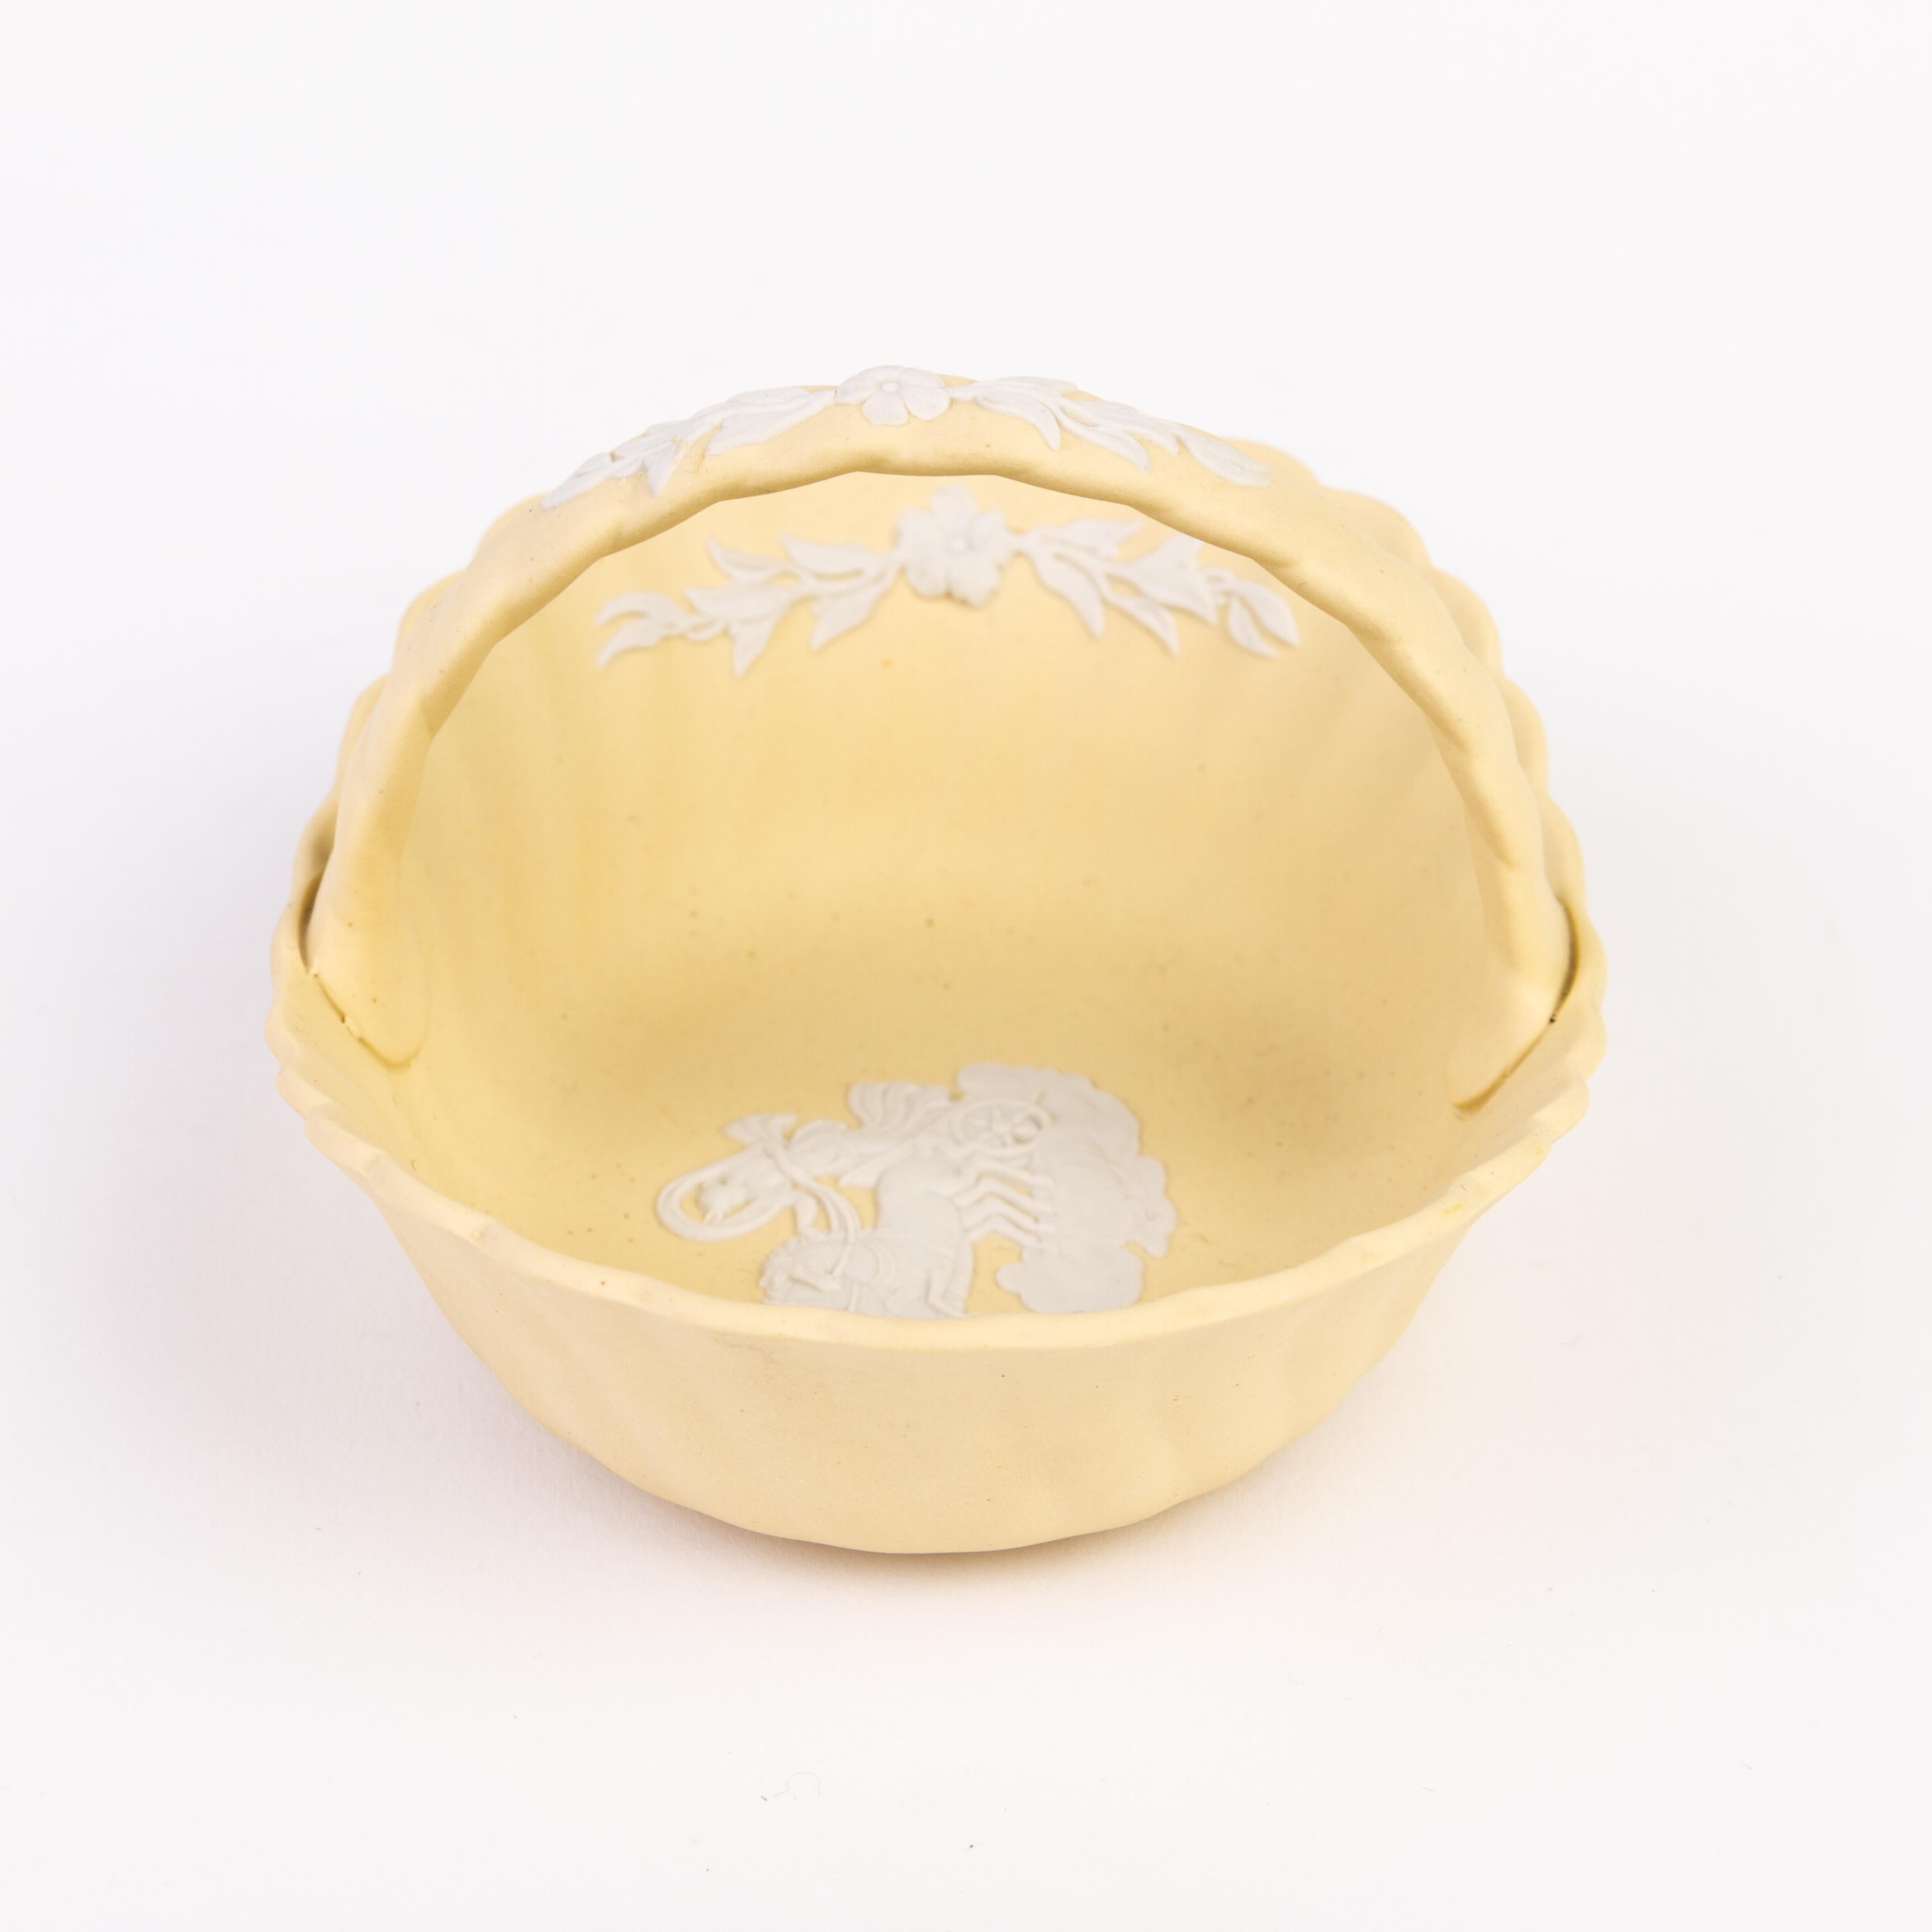 From a private collection.
Free international shipping.
Wedgwood Primrose Yellow Jasperware Basket 